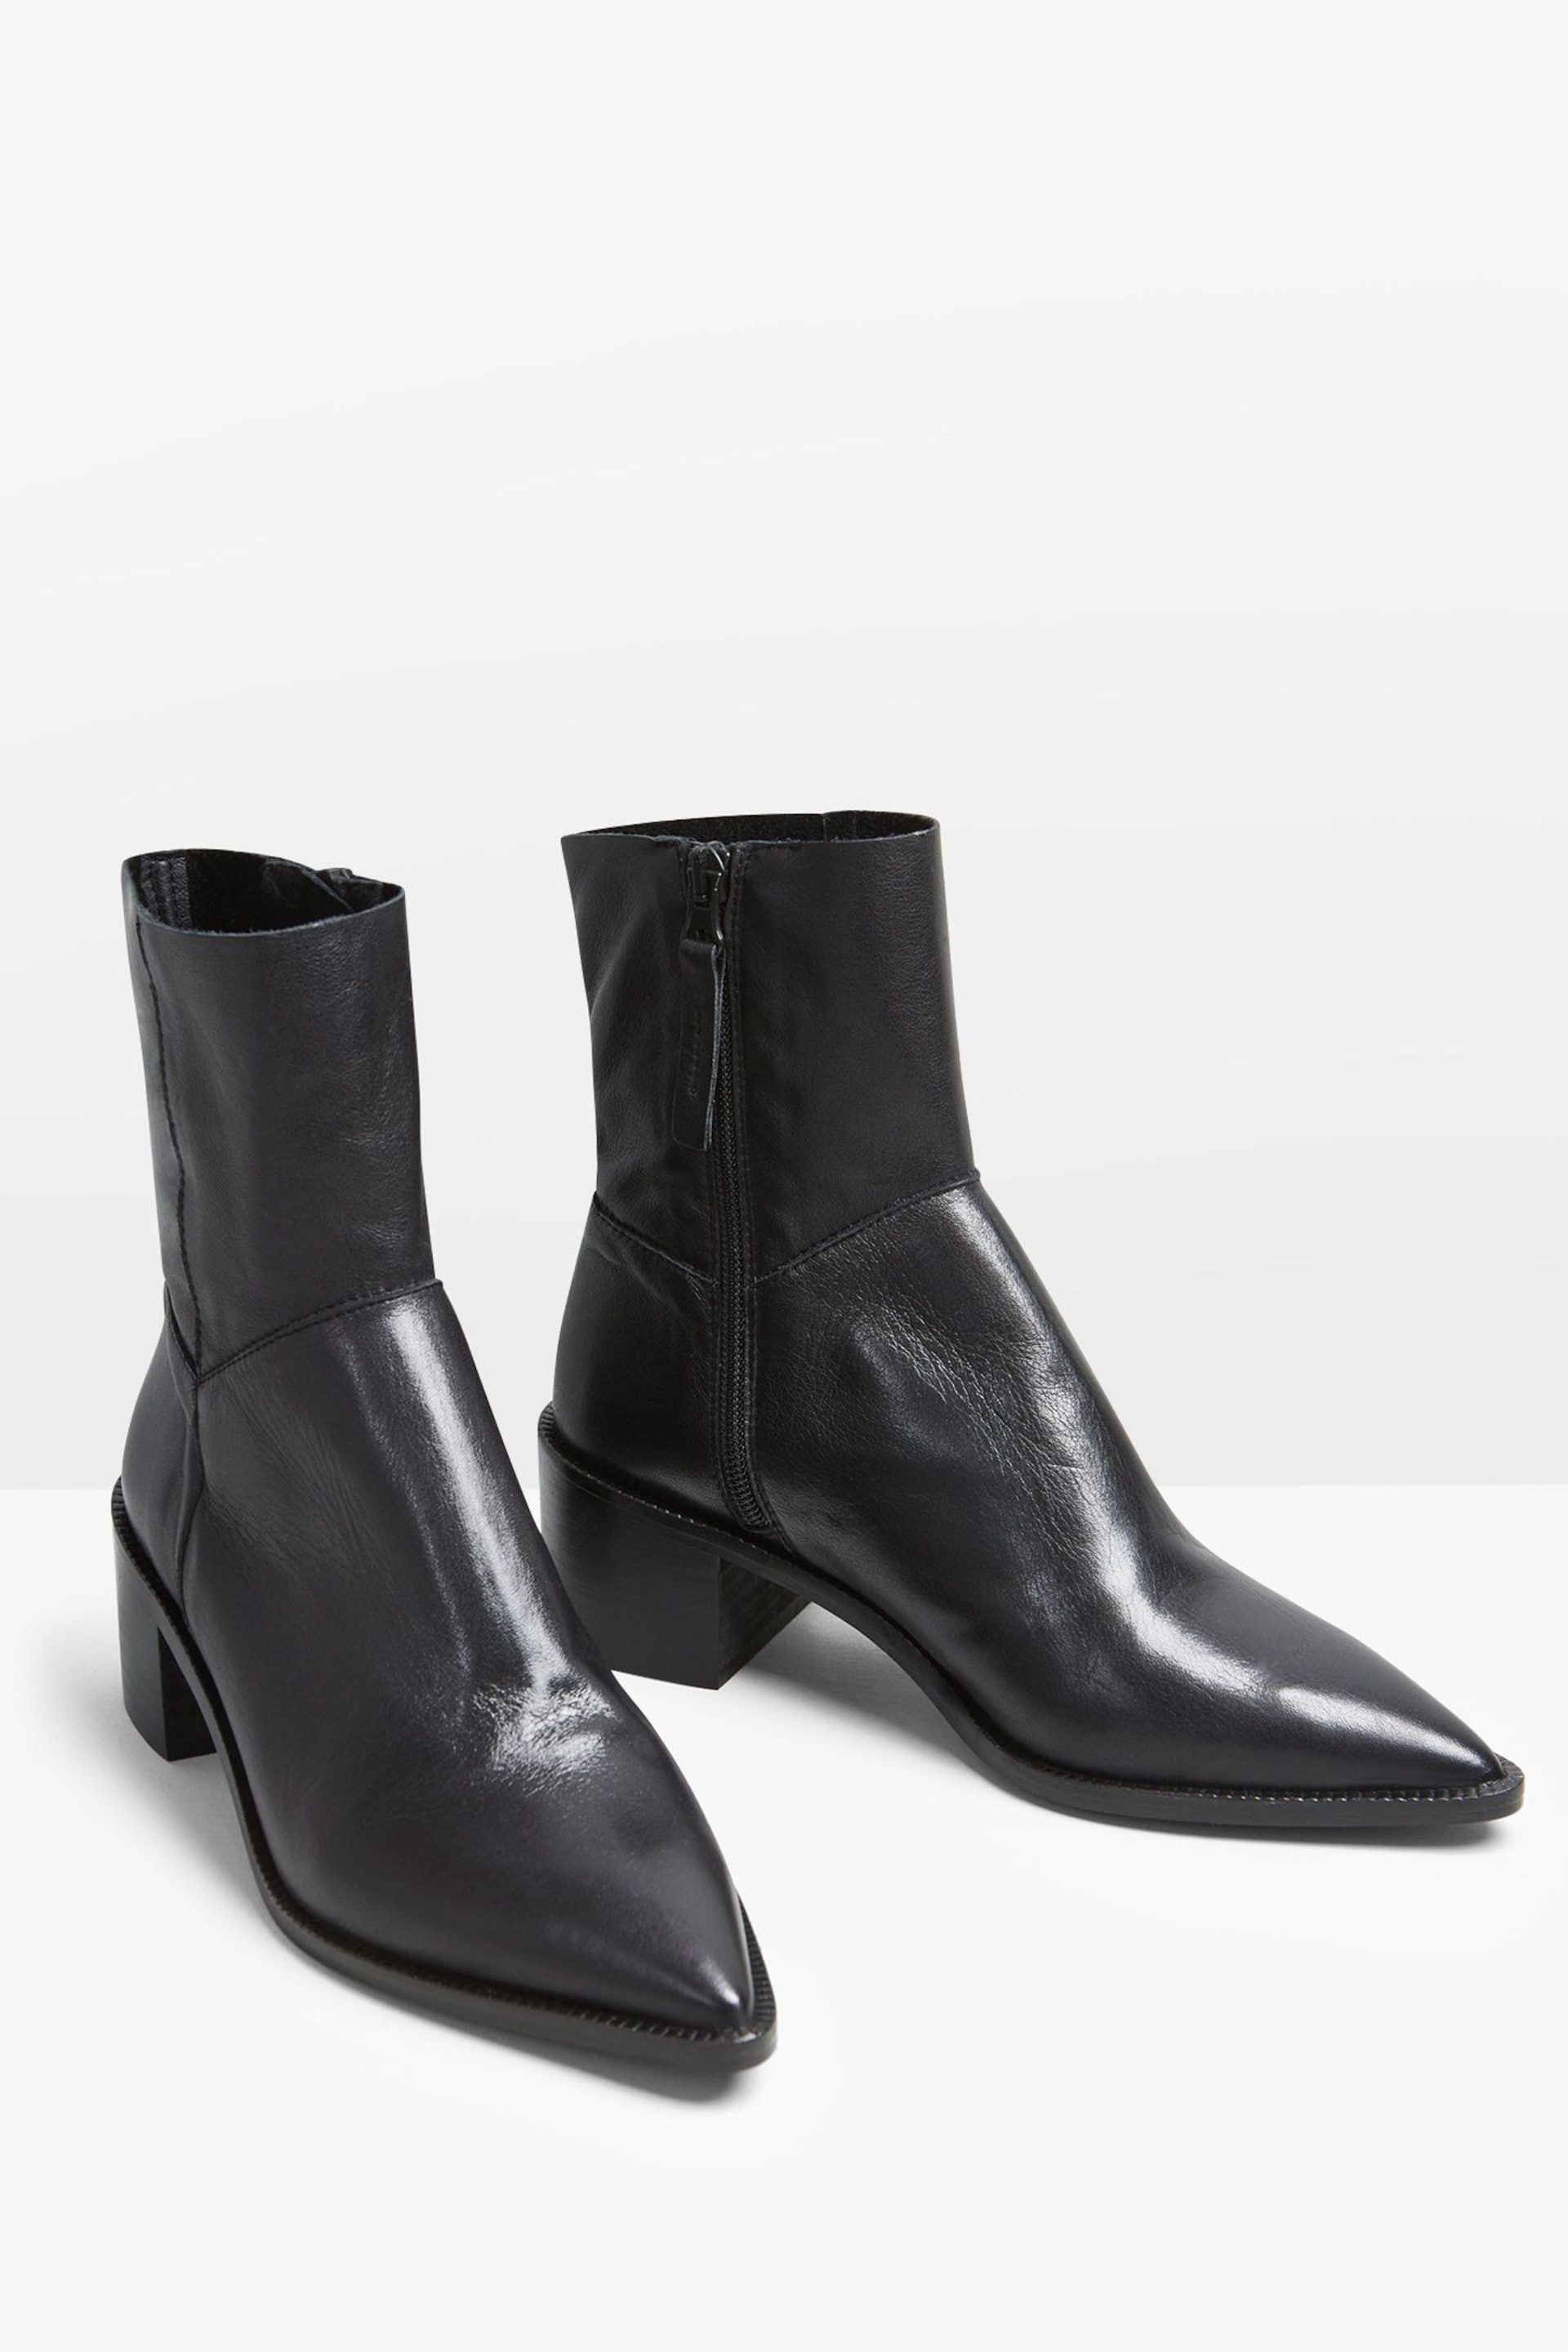 Hush Black Taylah Ankle Boots - Image 3 of 5